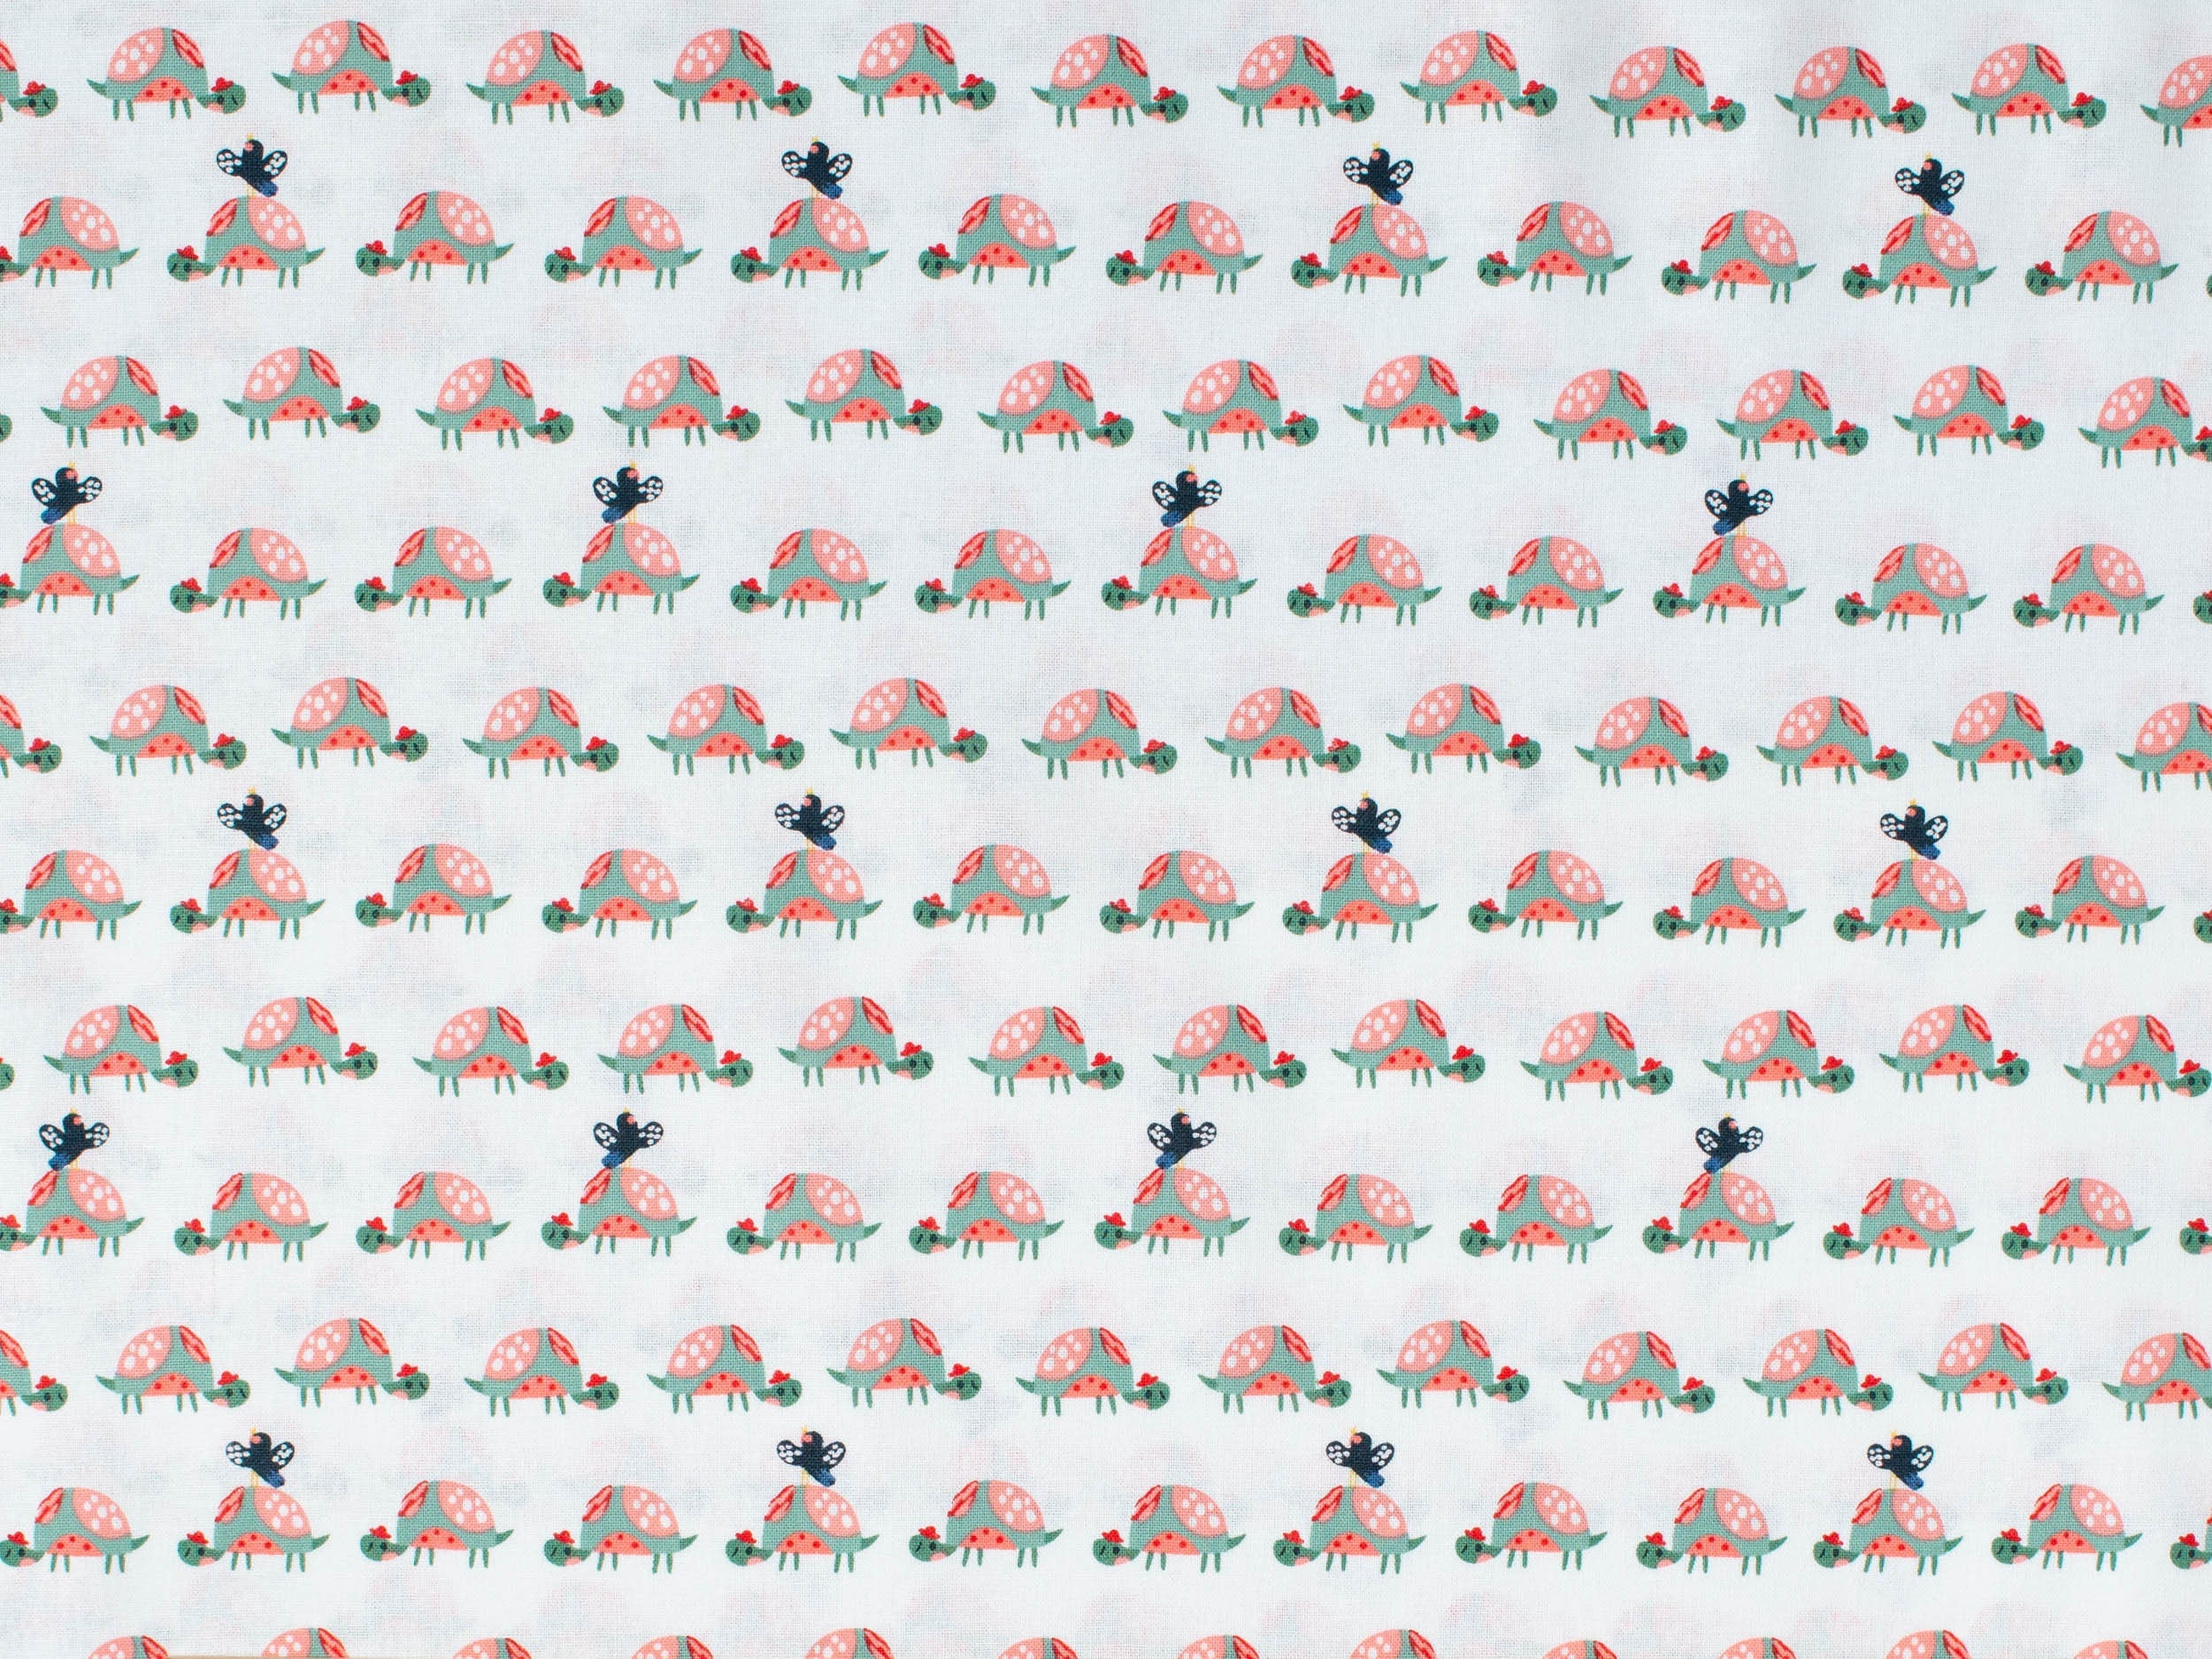 Tortoises children's fabric on white cotton - Wild about you by Fabric Editions